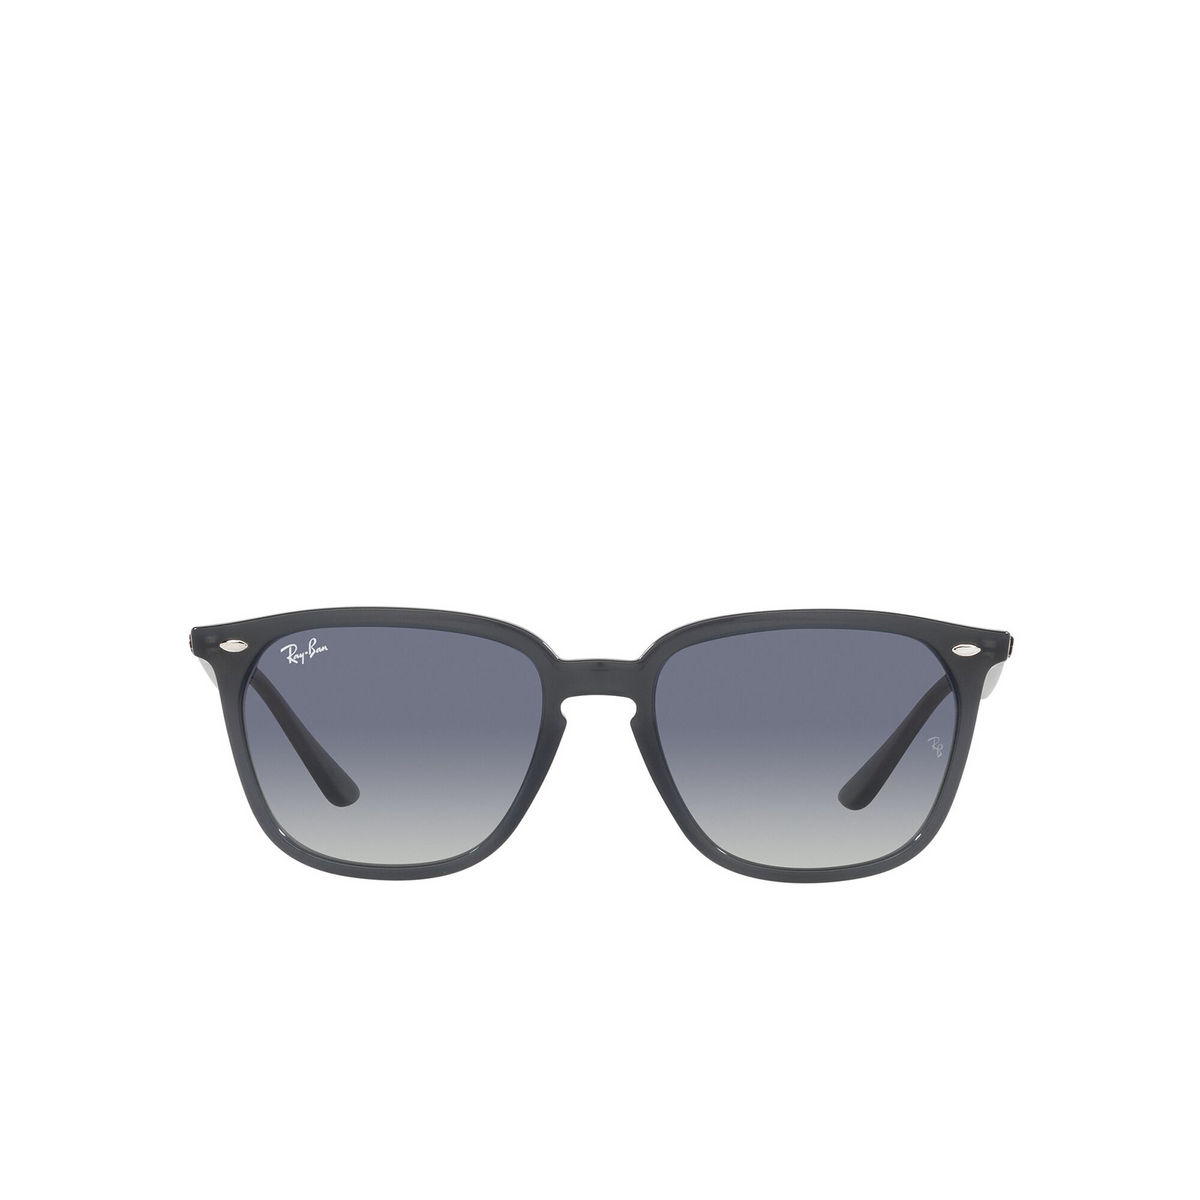 Ray-Ban® Square Sunglasses: RB4362 color Opal Grey 62304L - front view.